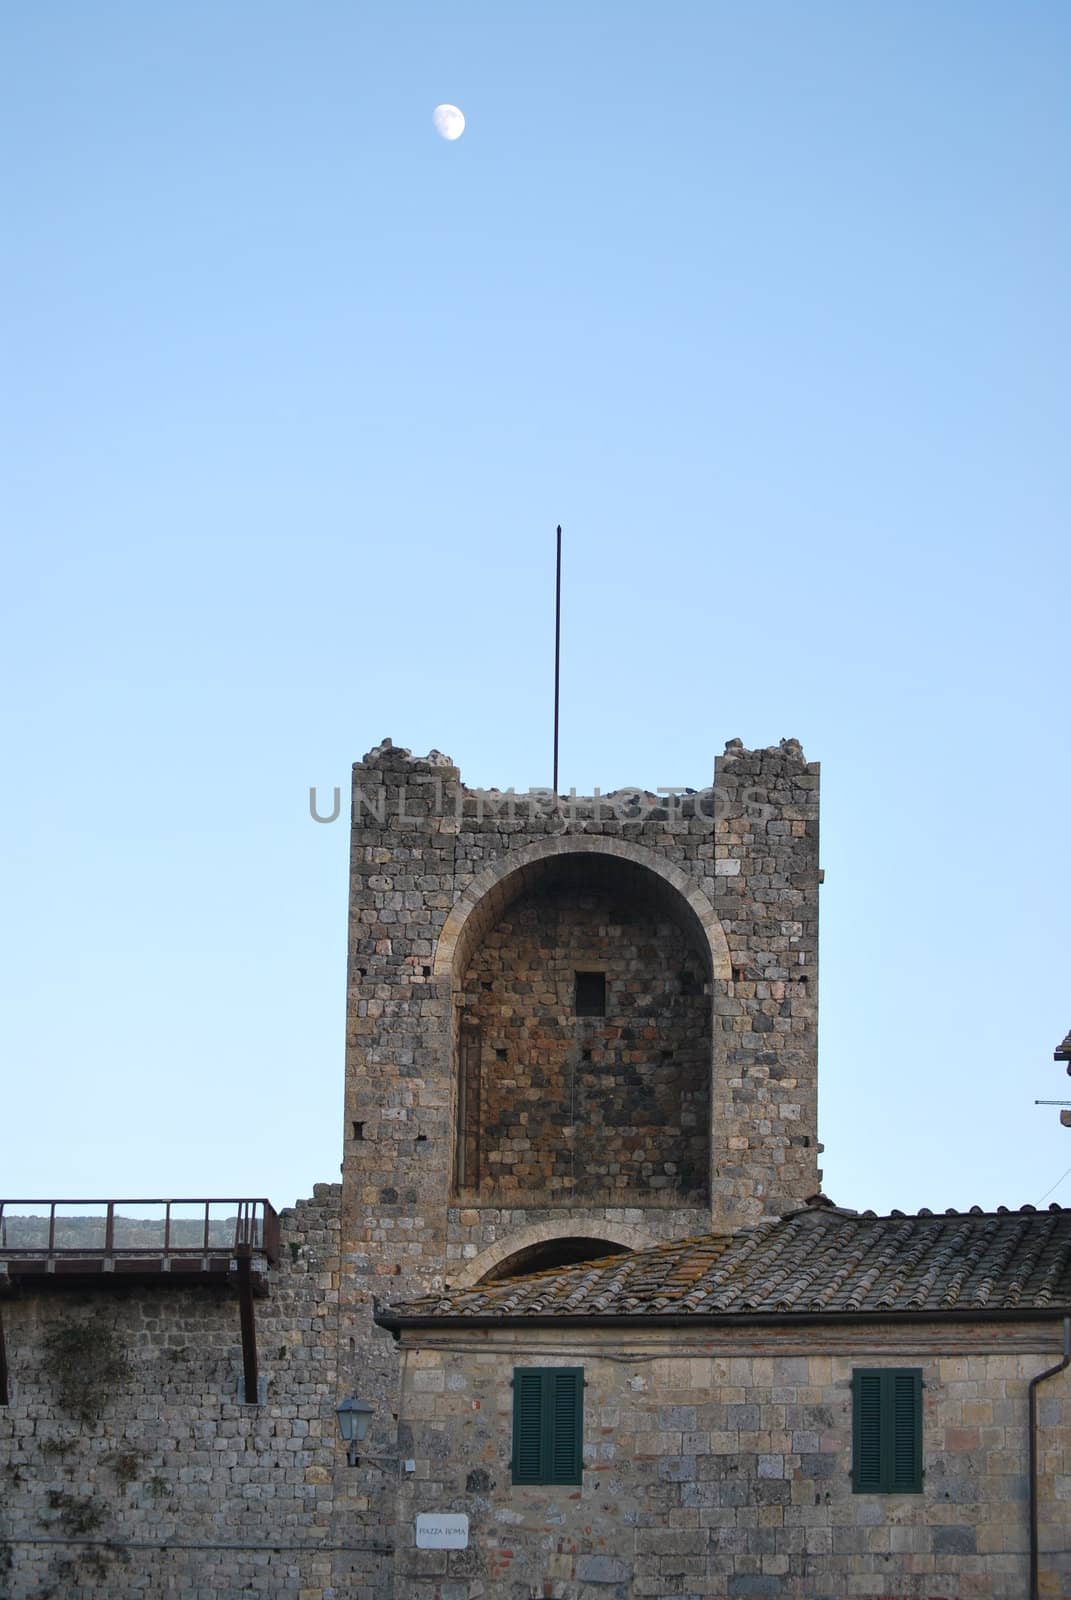 Town-walls of Monteriggioni medieval village completely encircled from circular walls with 14 towers. Siena Tuscany Italy